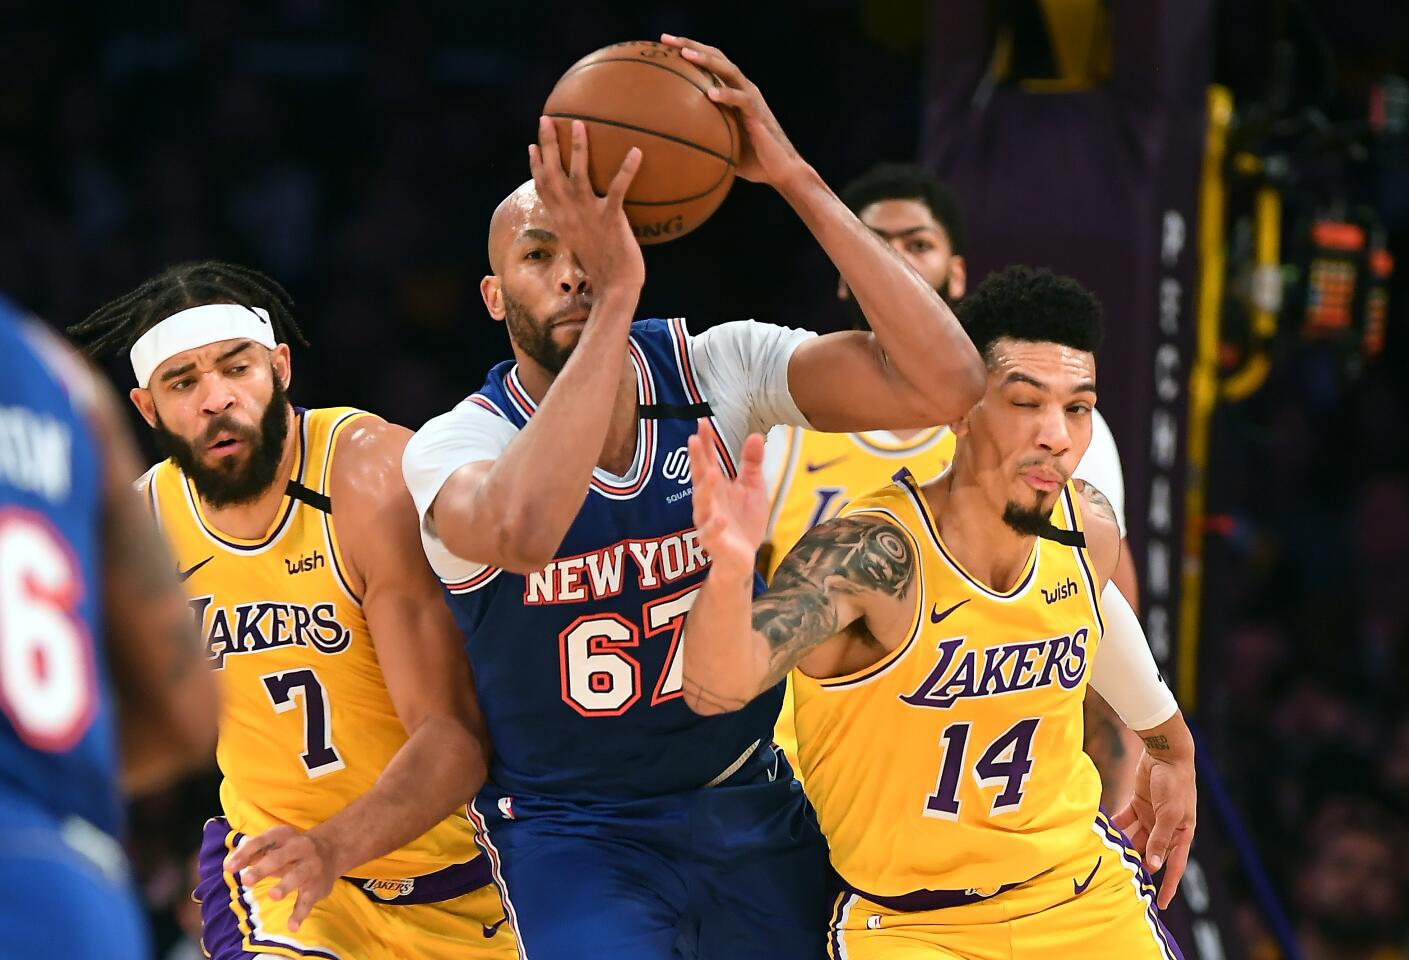 JaVale McGee and Danny Green battle for loose ball with Knicks center Taj Gibson during the first quarter of a game Jan. 7 at Staples Center.